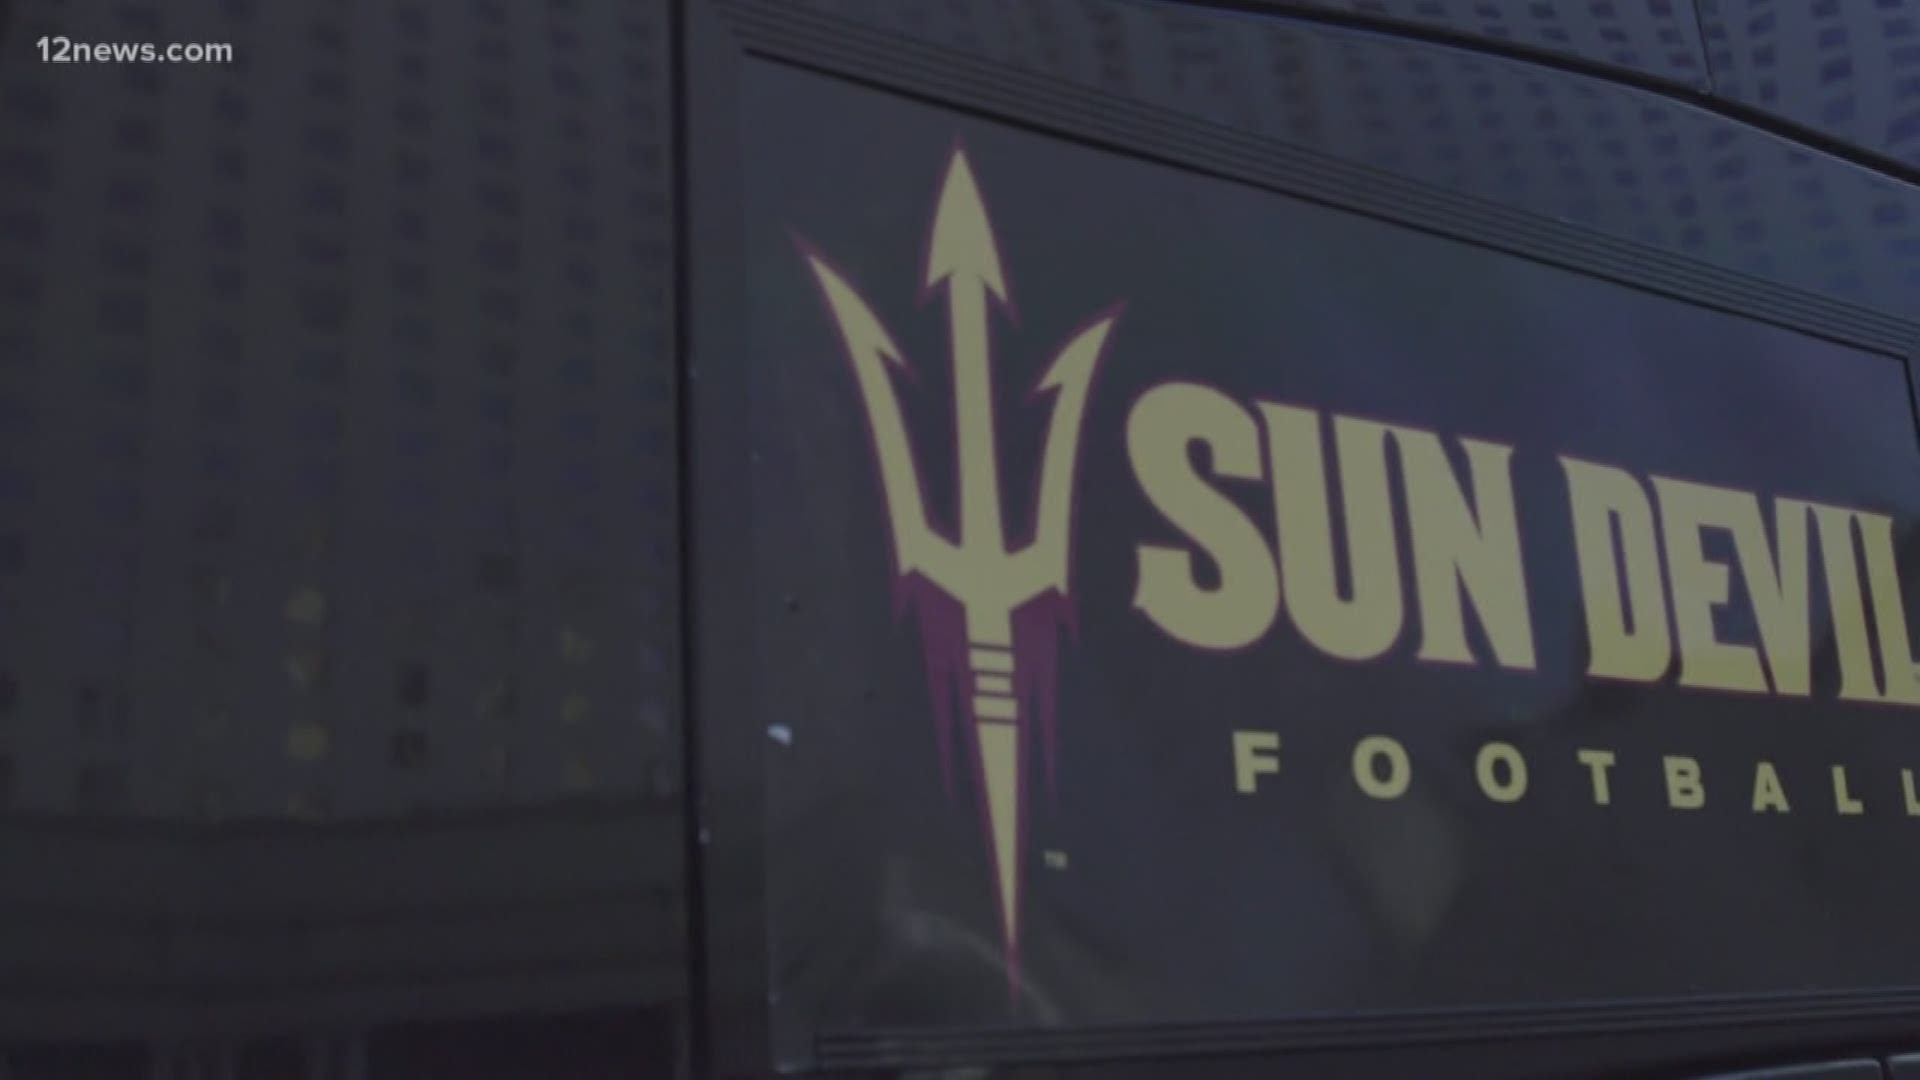 ASU hit the road for bowl week, arriving in Las Vegas ahead of the Las Vegas Bowl. 12 News is your only local TV station following along as the Devils prepare for their big bowl match.